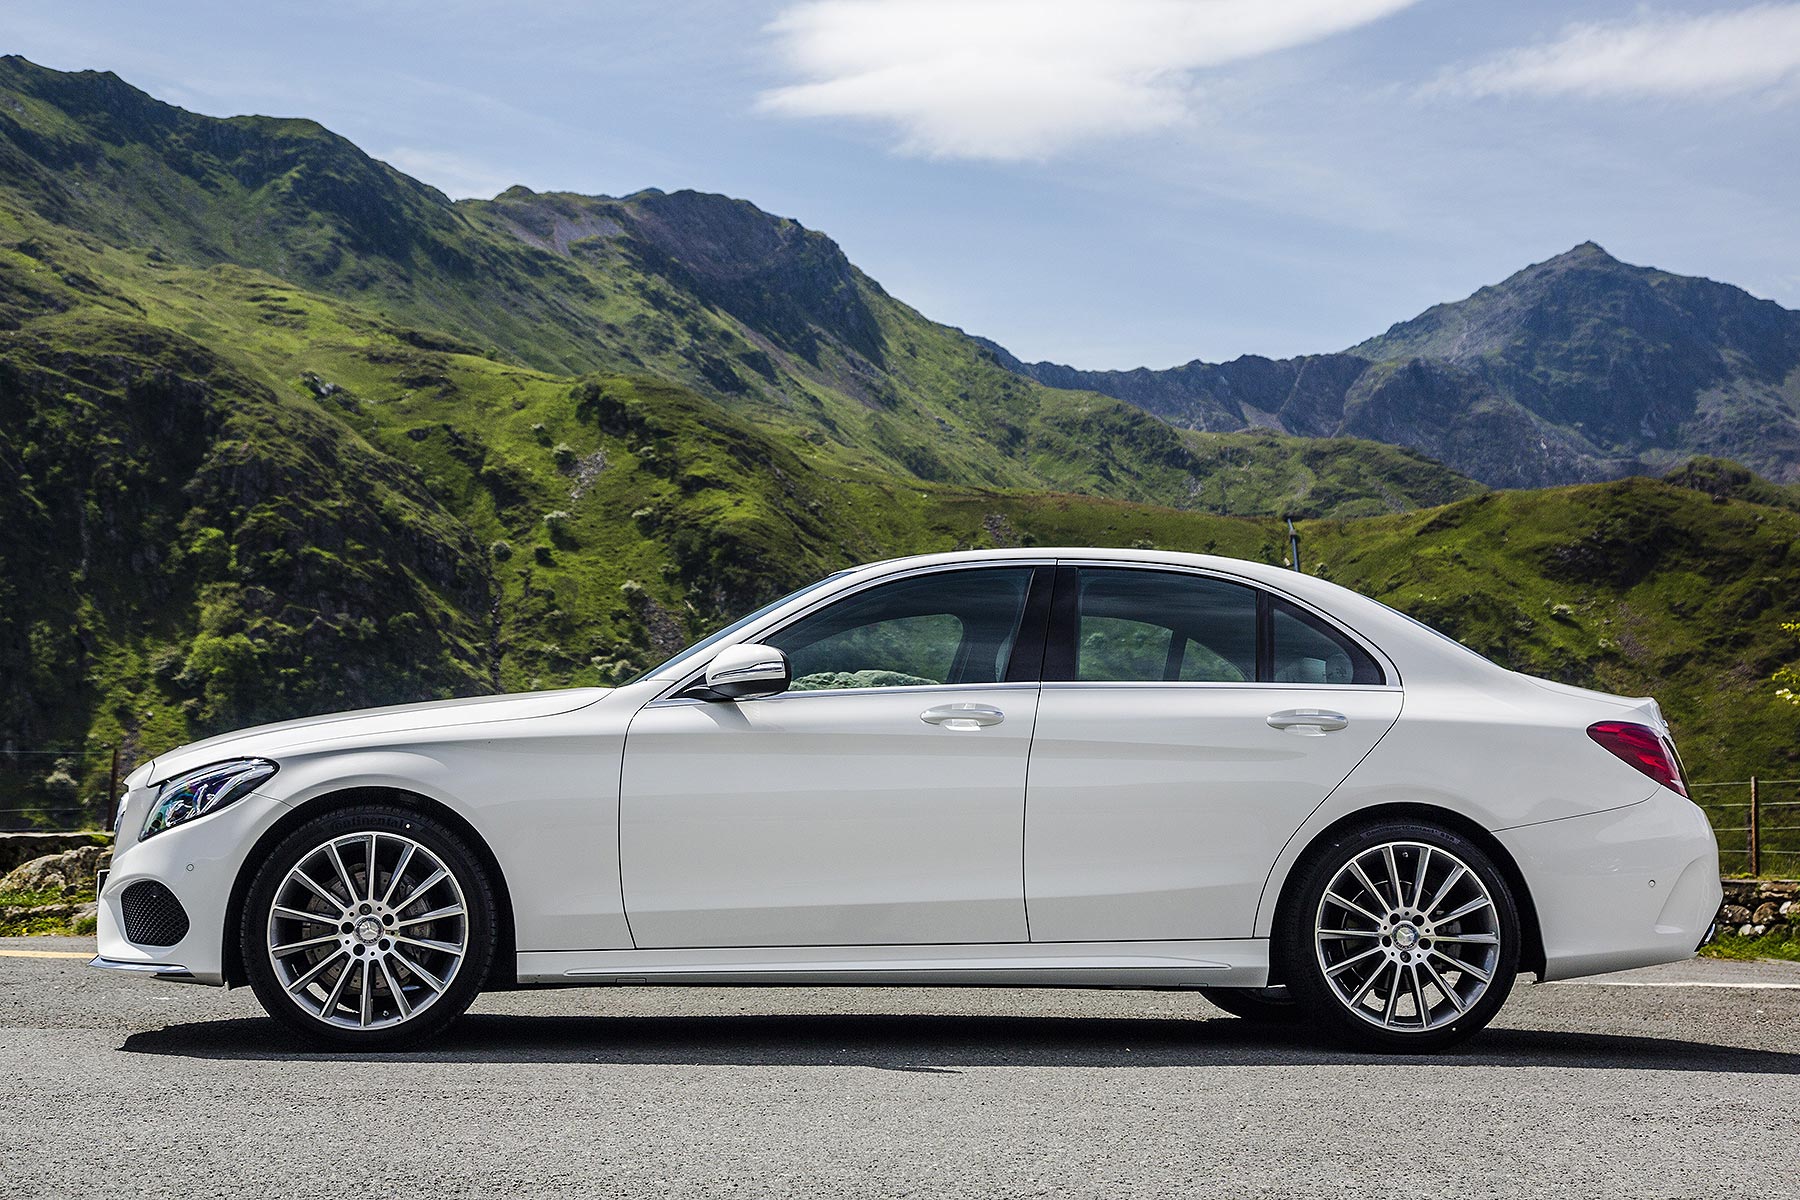 Mercedes-Benz C 250 d AMG Line review: 2015 road test | Motoring Research